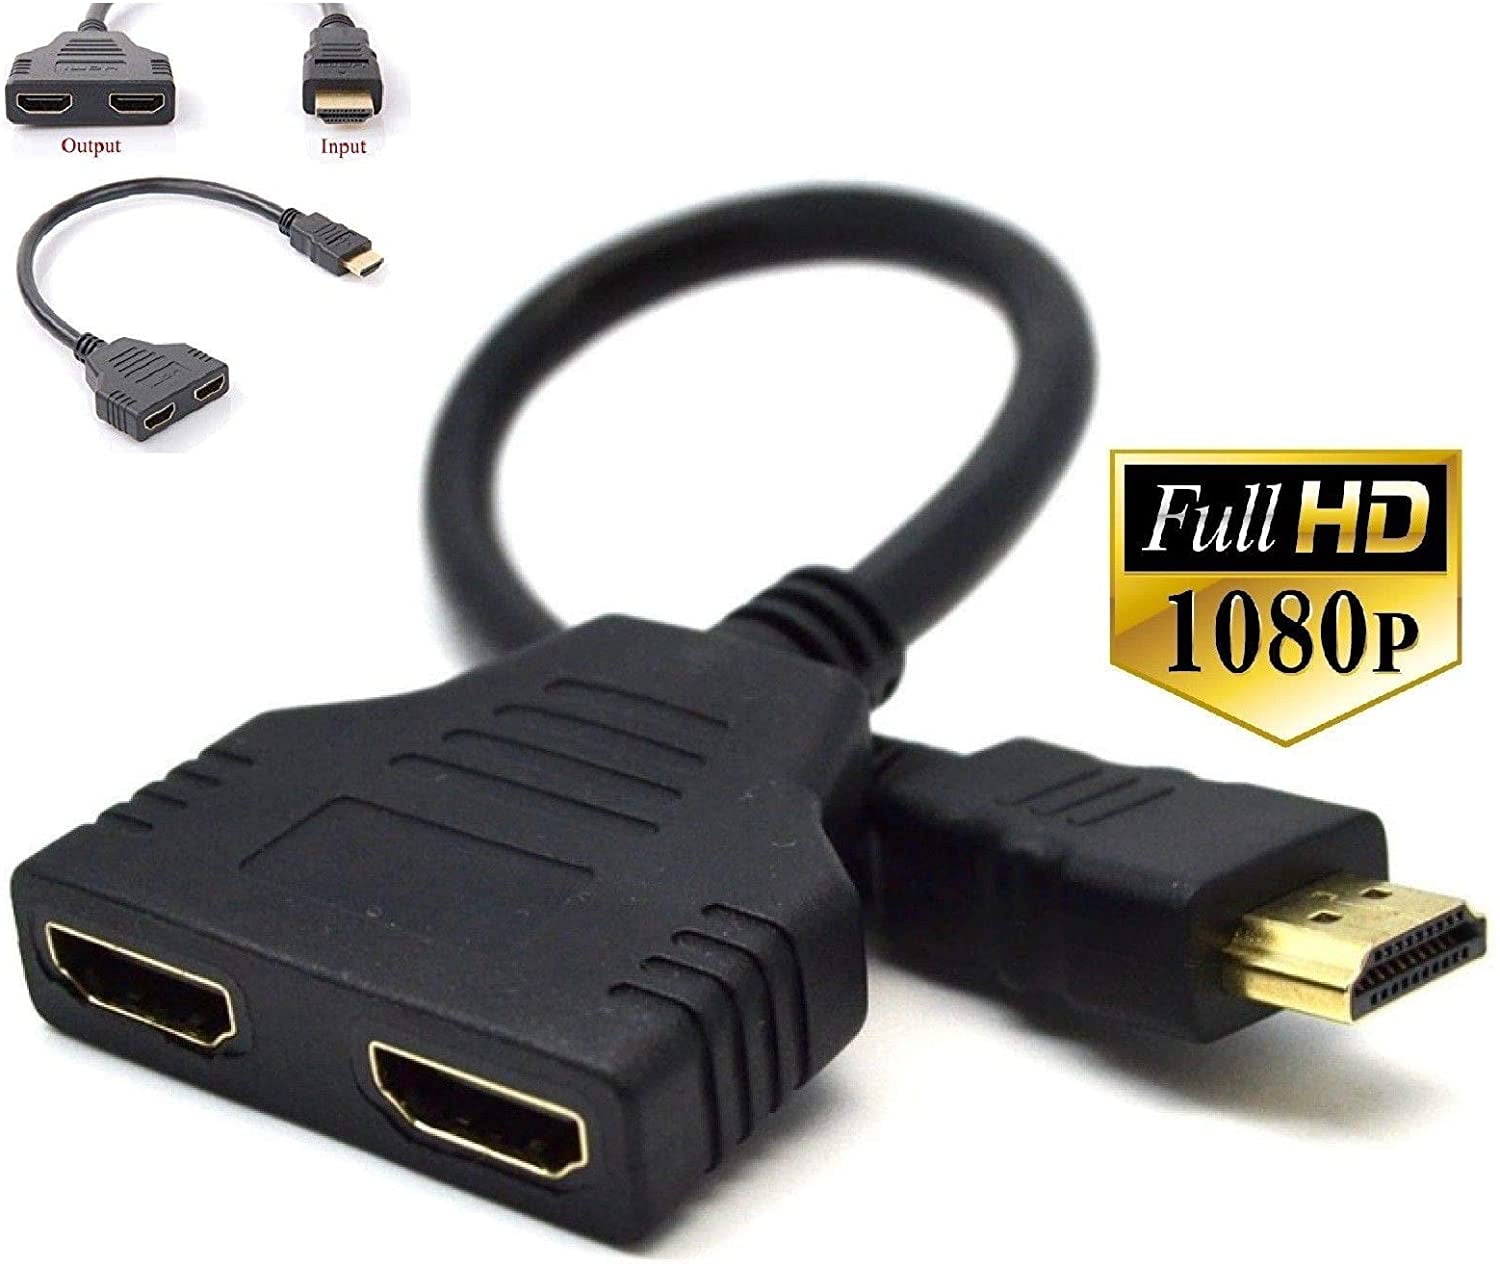 HDMI Cable Splitter 1 in 2 Out HDMI Adapter Cable HDMI Male to Dual HDMI Female 1 to 2 Way for HDMI HD LED TV ps3 Two Out Signal One in Support Two TVs at The Same Time 